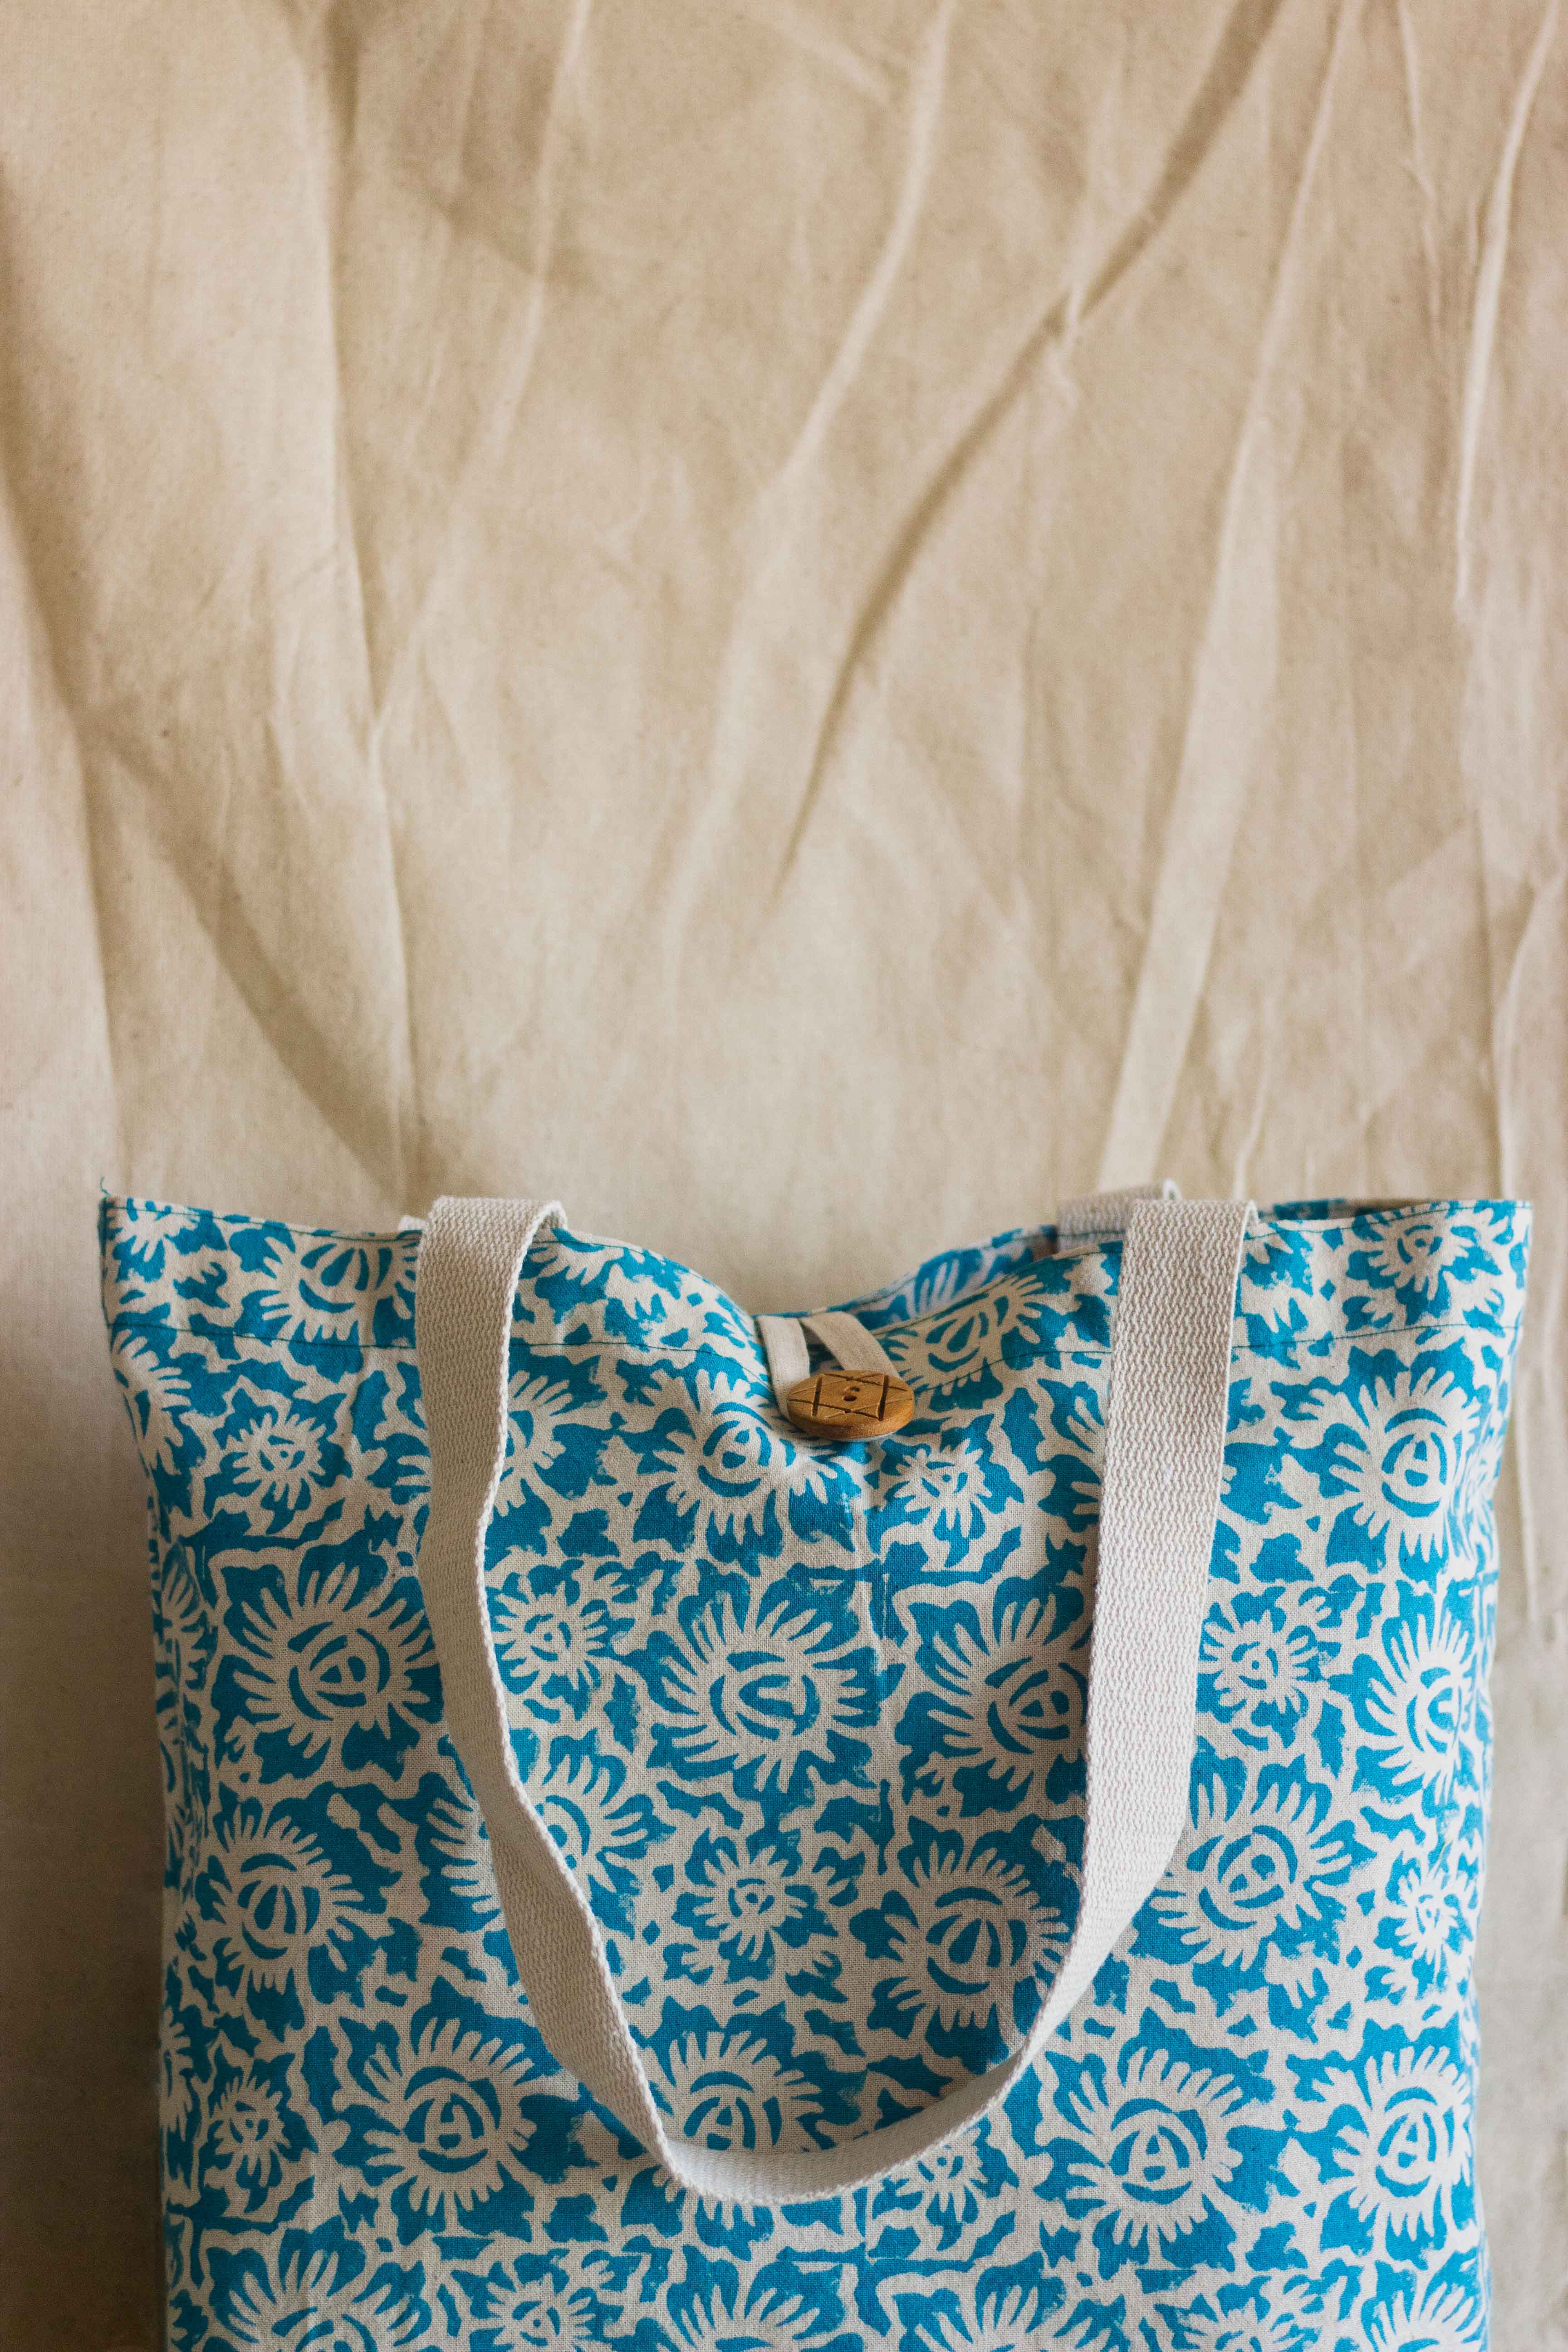 Cotton Shopping Tote Bag · Floral Fun Blue – rusticblends